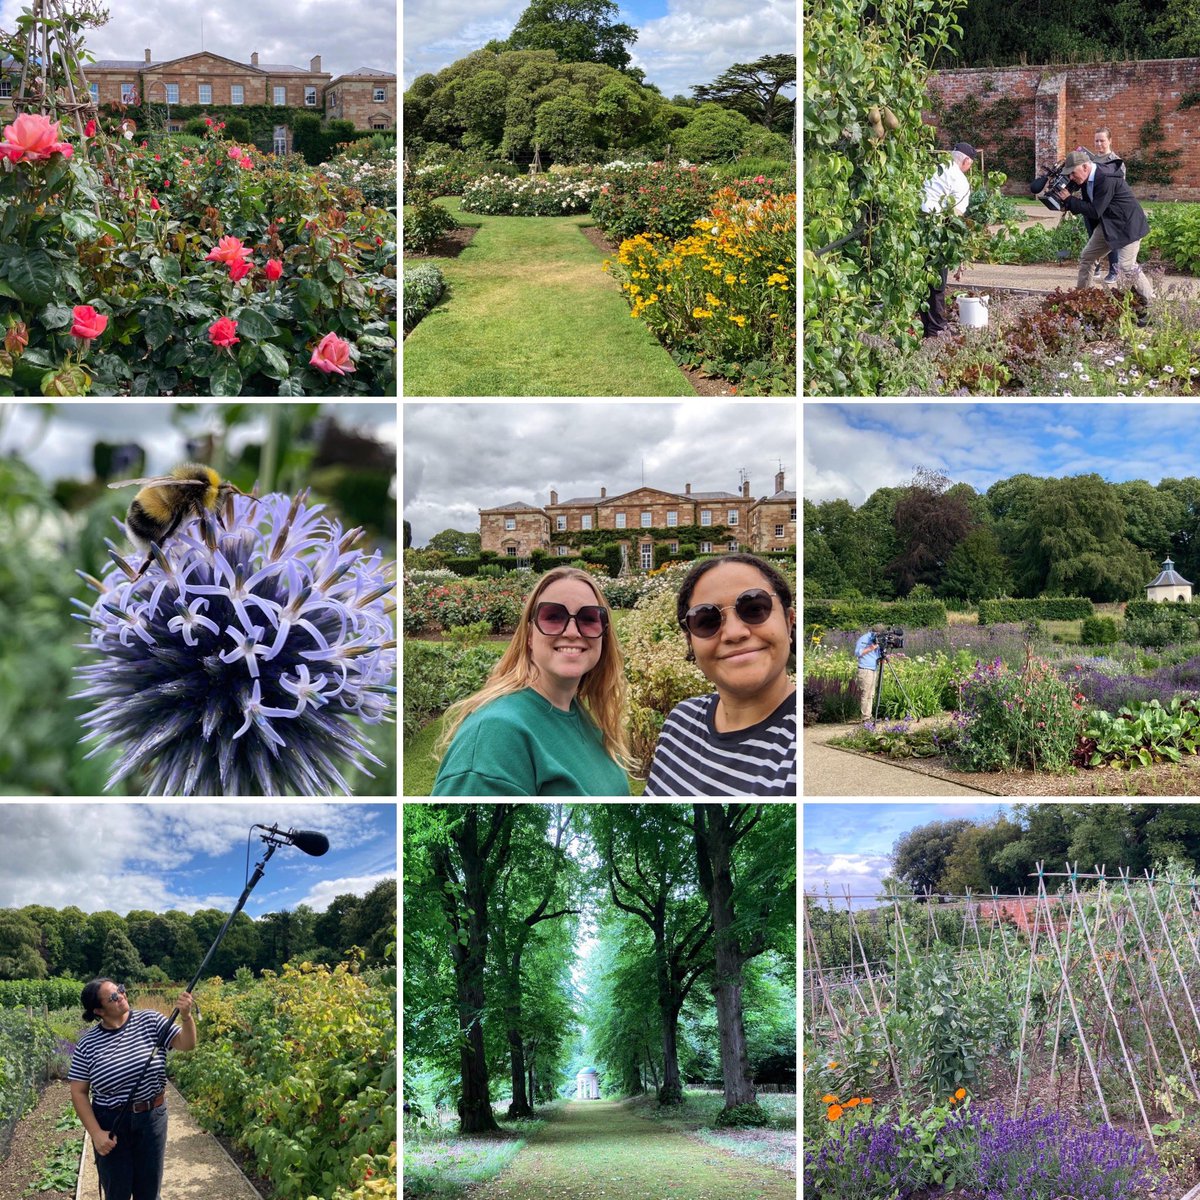 We’ve had the most beautiful time filming at Hillsborough Castle in Northern Ireland. Such a great experience filled with history & many stories all for a new series coming next year!
#filming #onlocation #tv #tvcrew #northernireland #gardens #castle #hillsboroughcastle #july